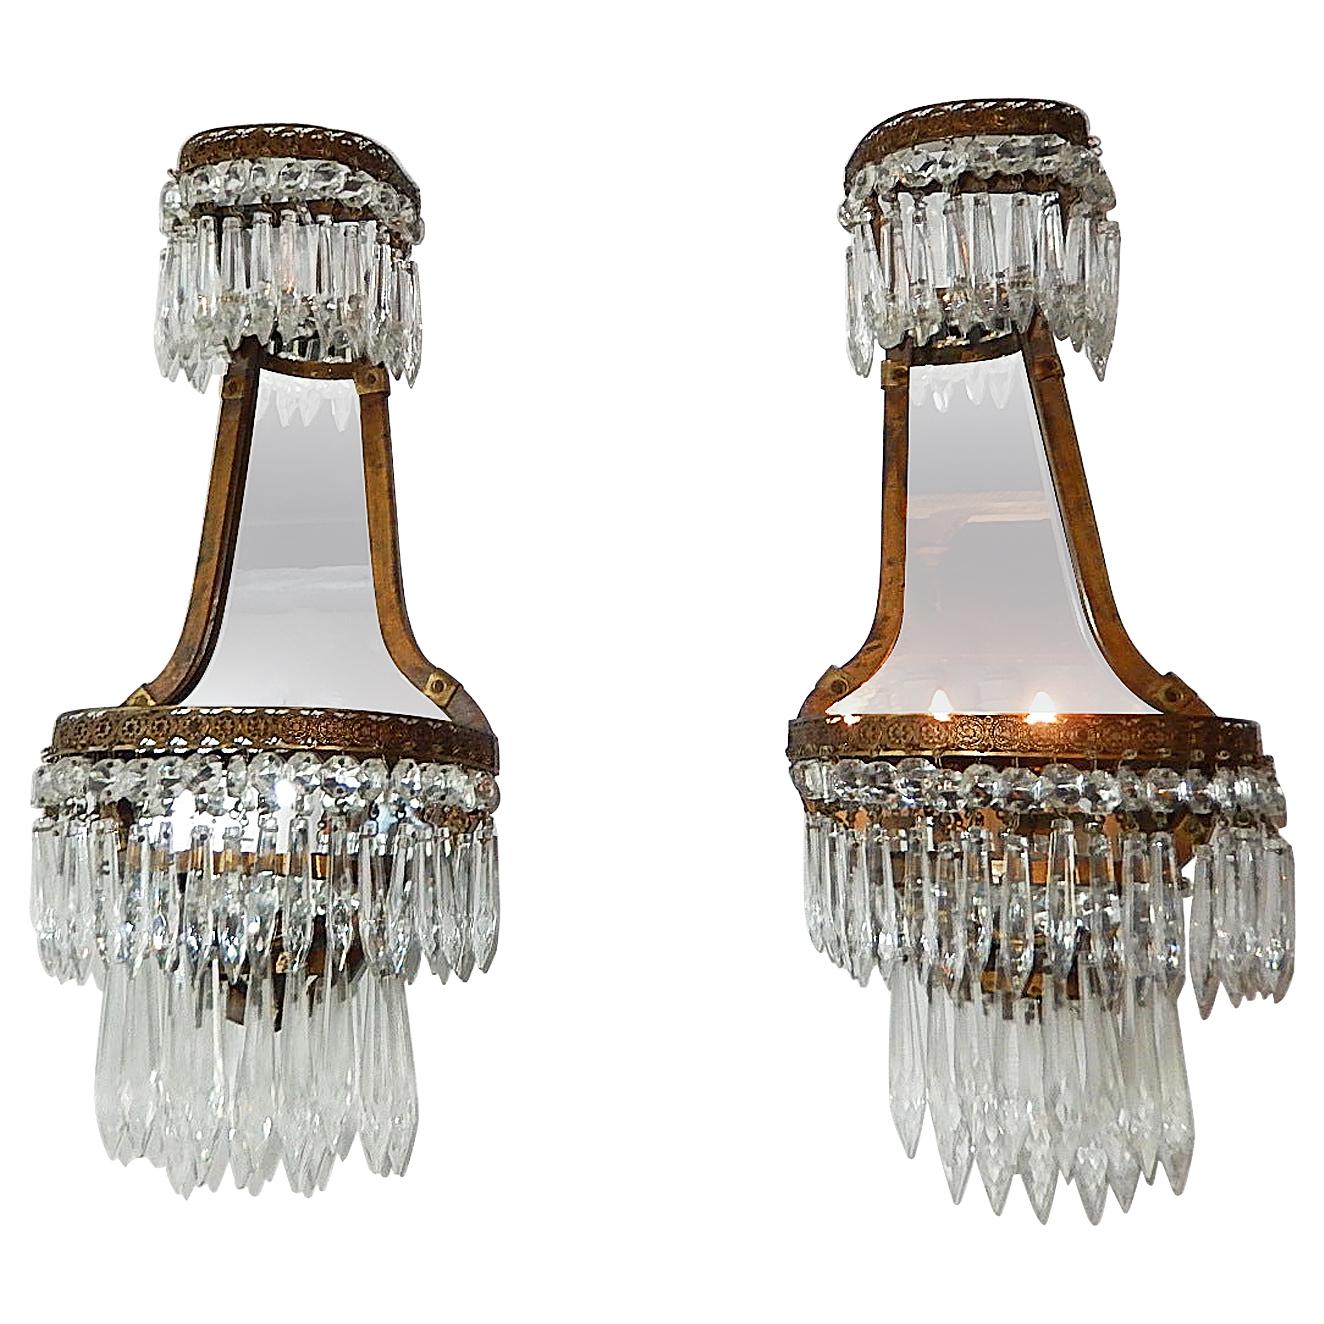 French Empire Crystal Prism with Mirrors Sconces, circa 1900 For Sale